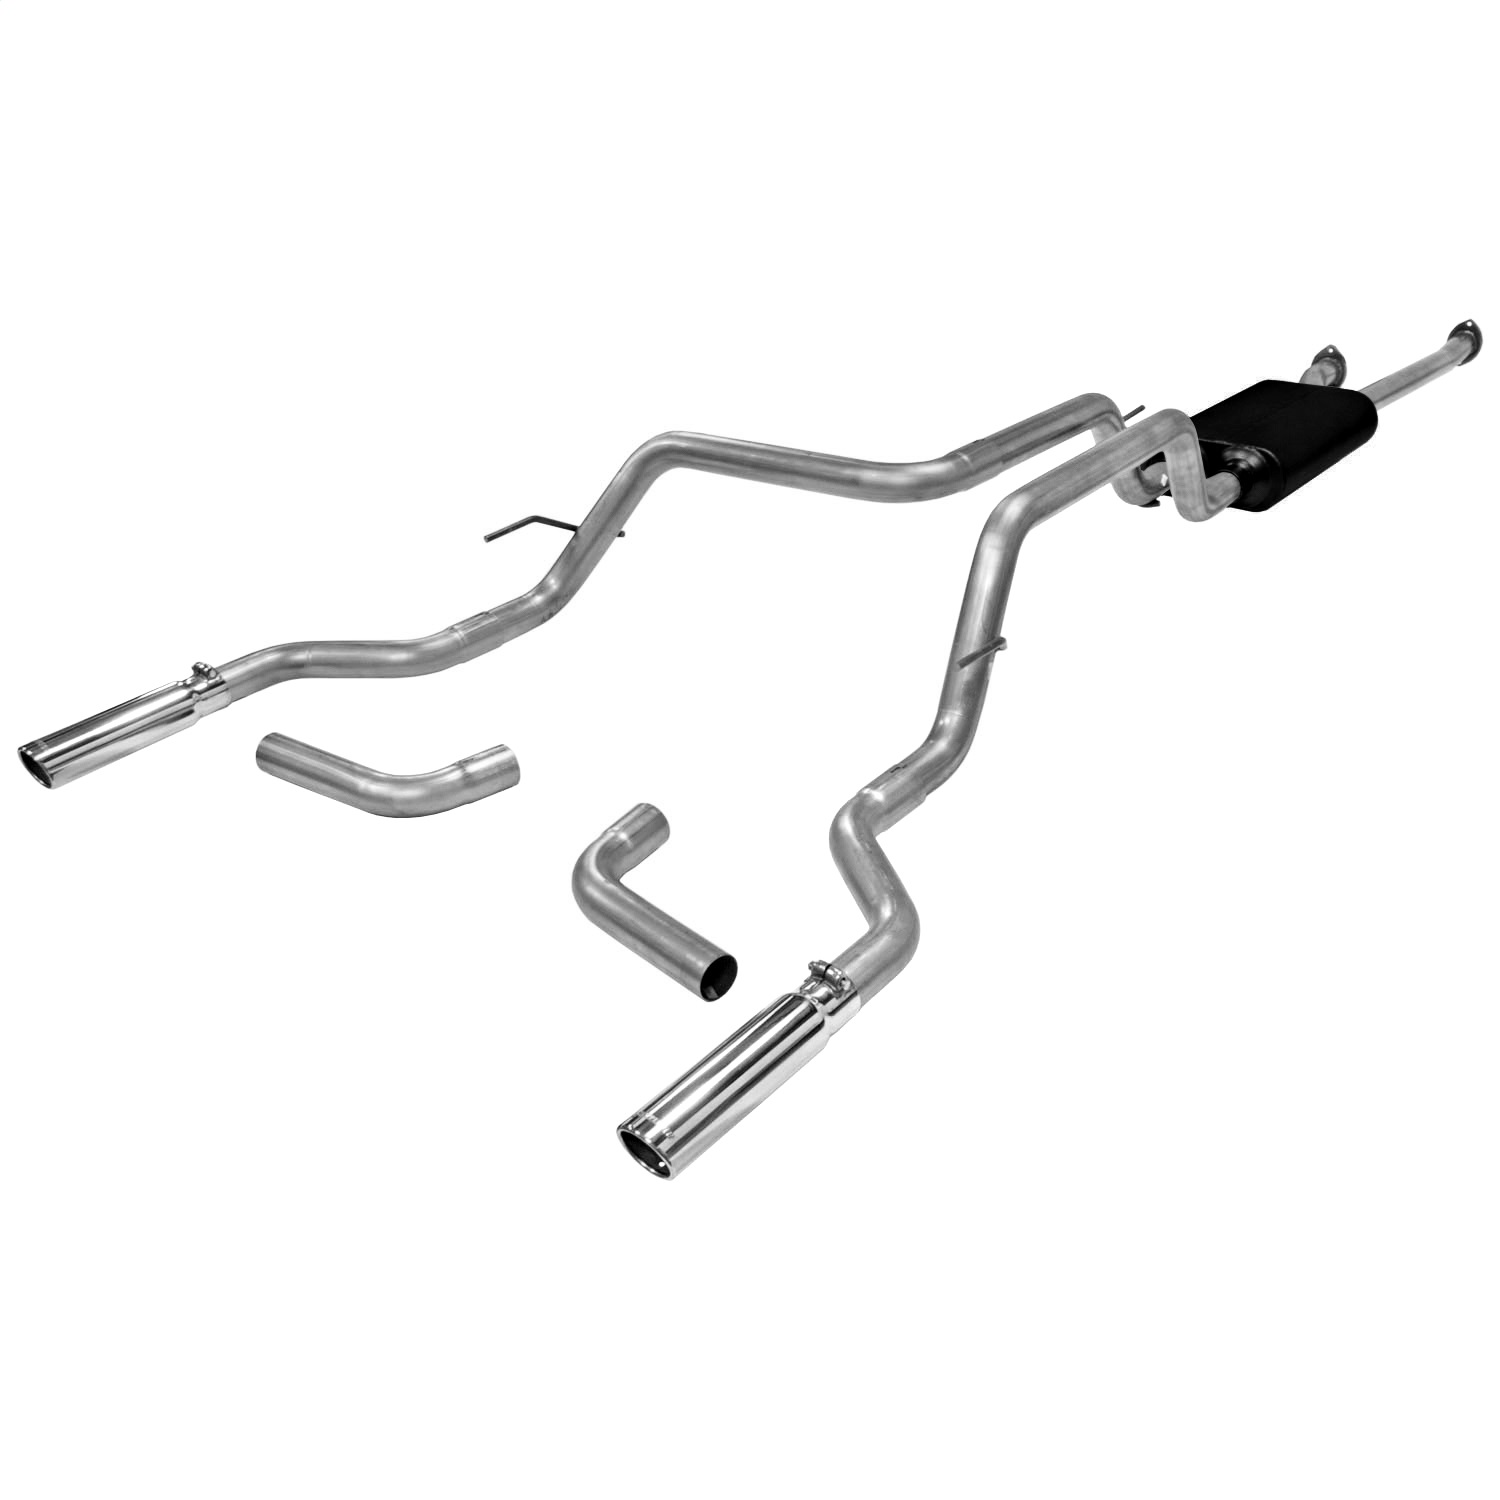 Flowmaster Flowmaster 817486 American Thunder Cat Back Exhaust System Fits 10-15 Tundra